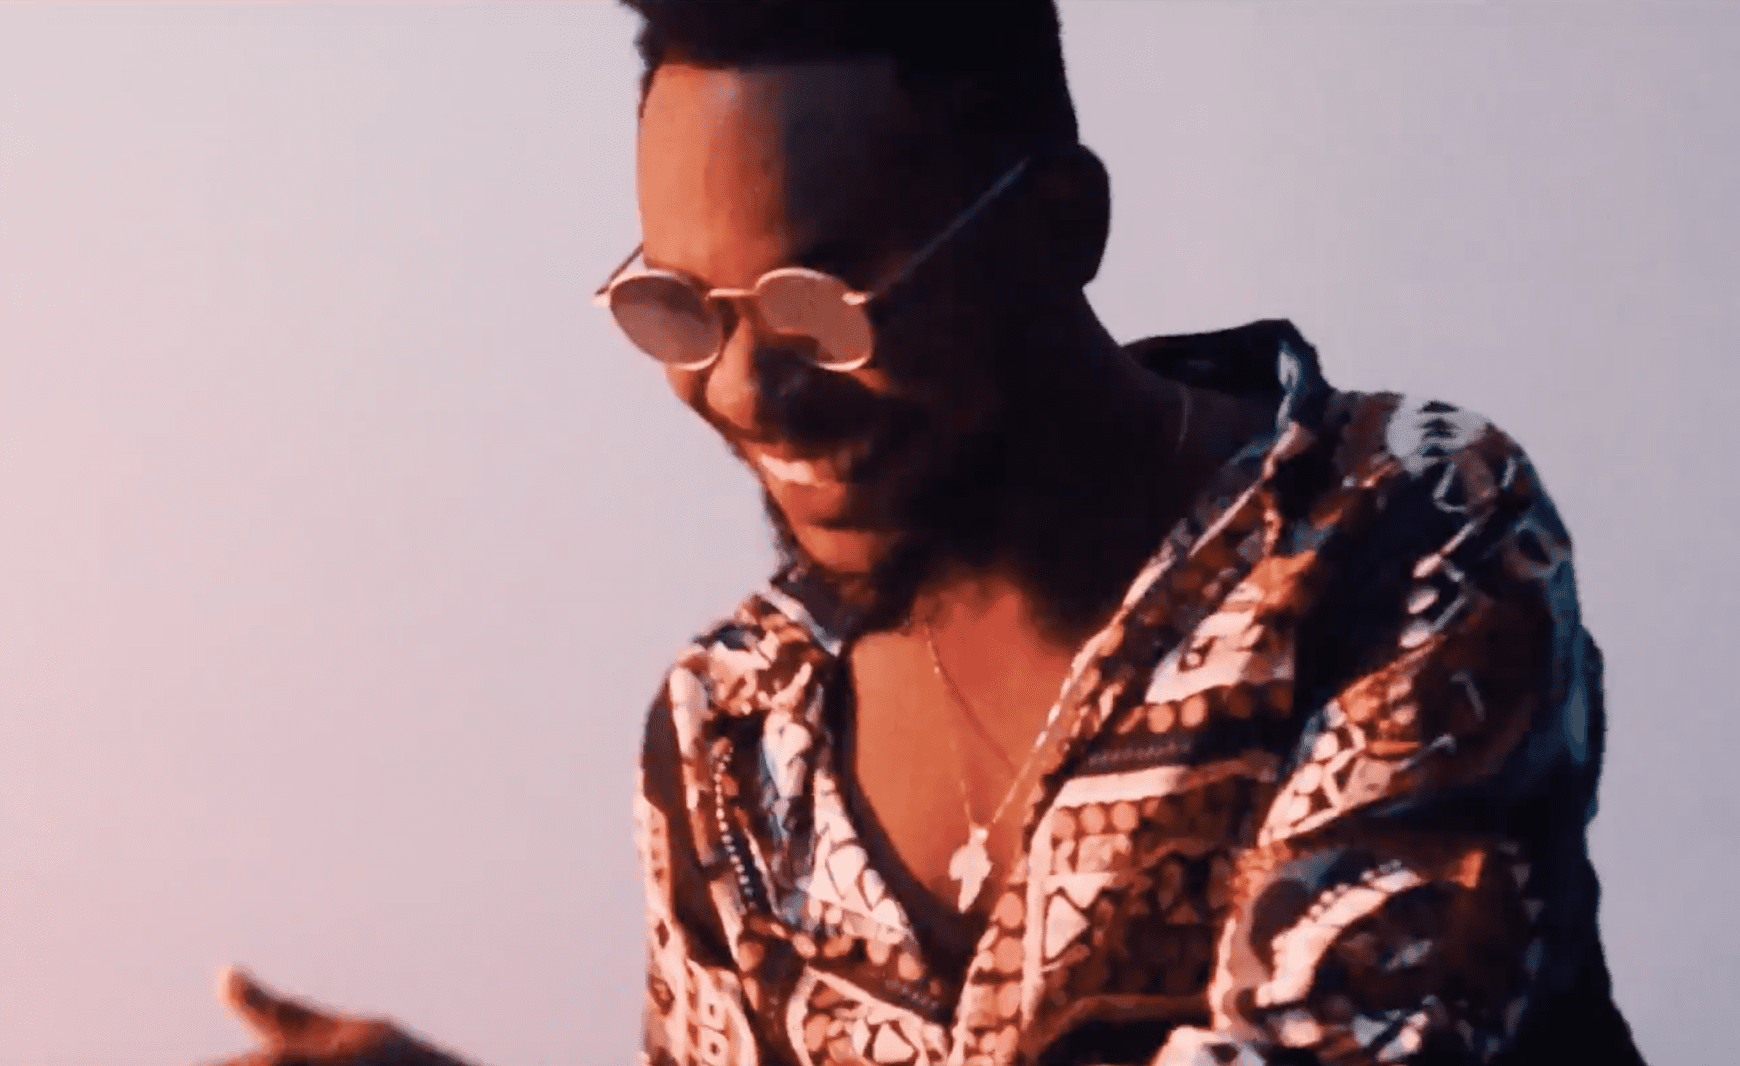 Adekunle Gold’s Video for “Call On Me” is everything you have come to expect